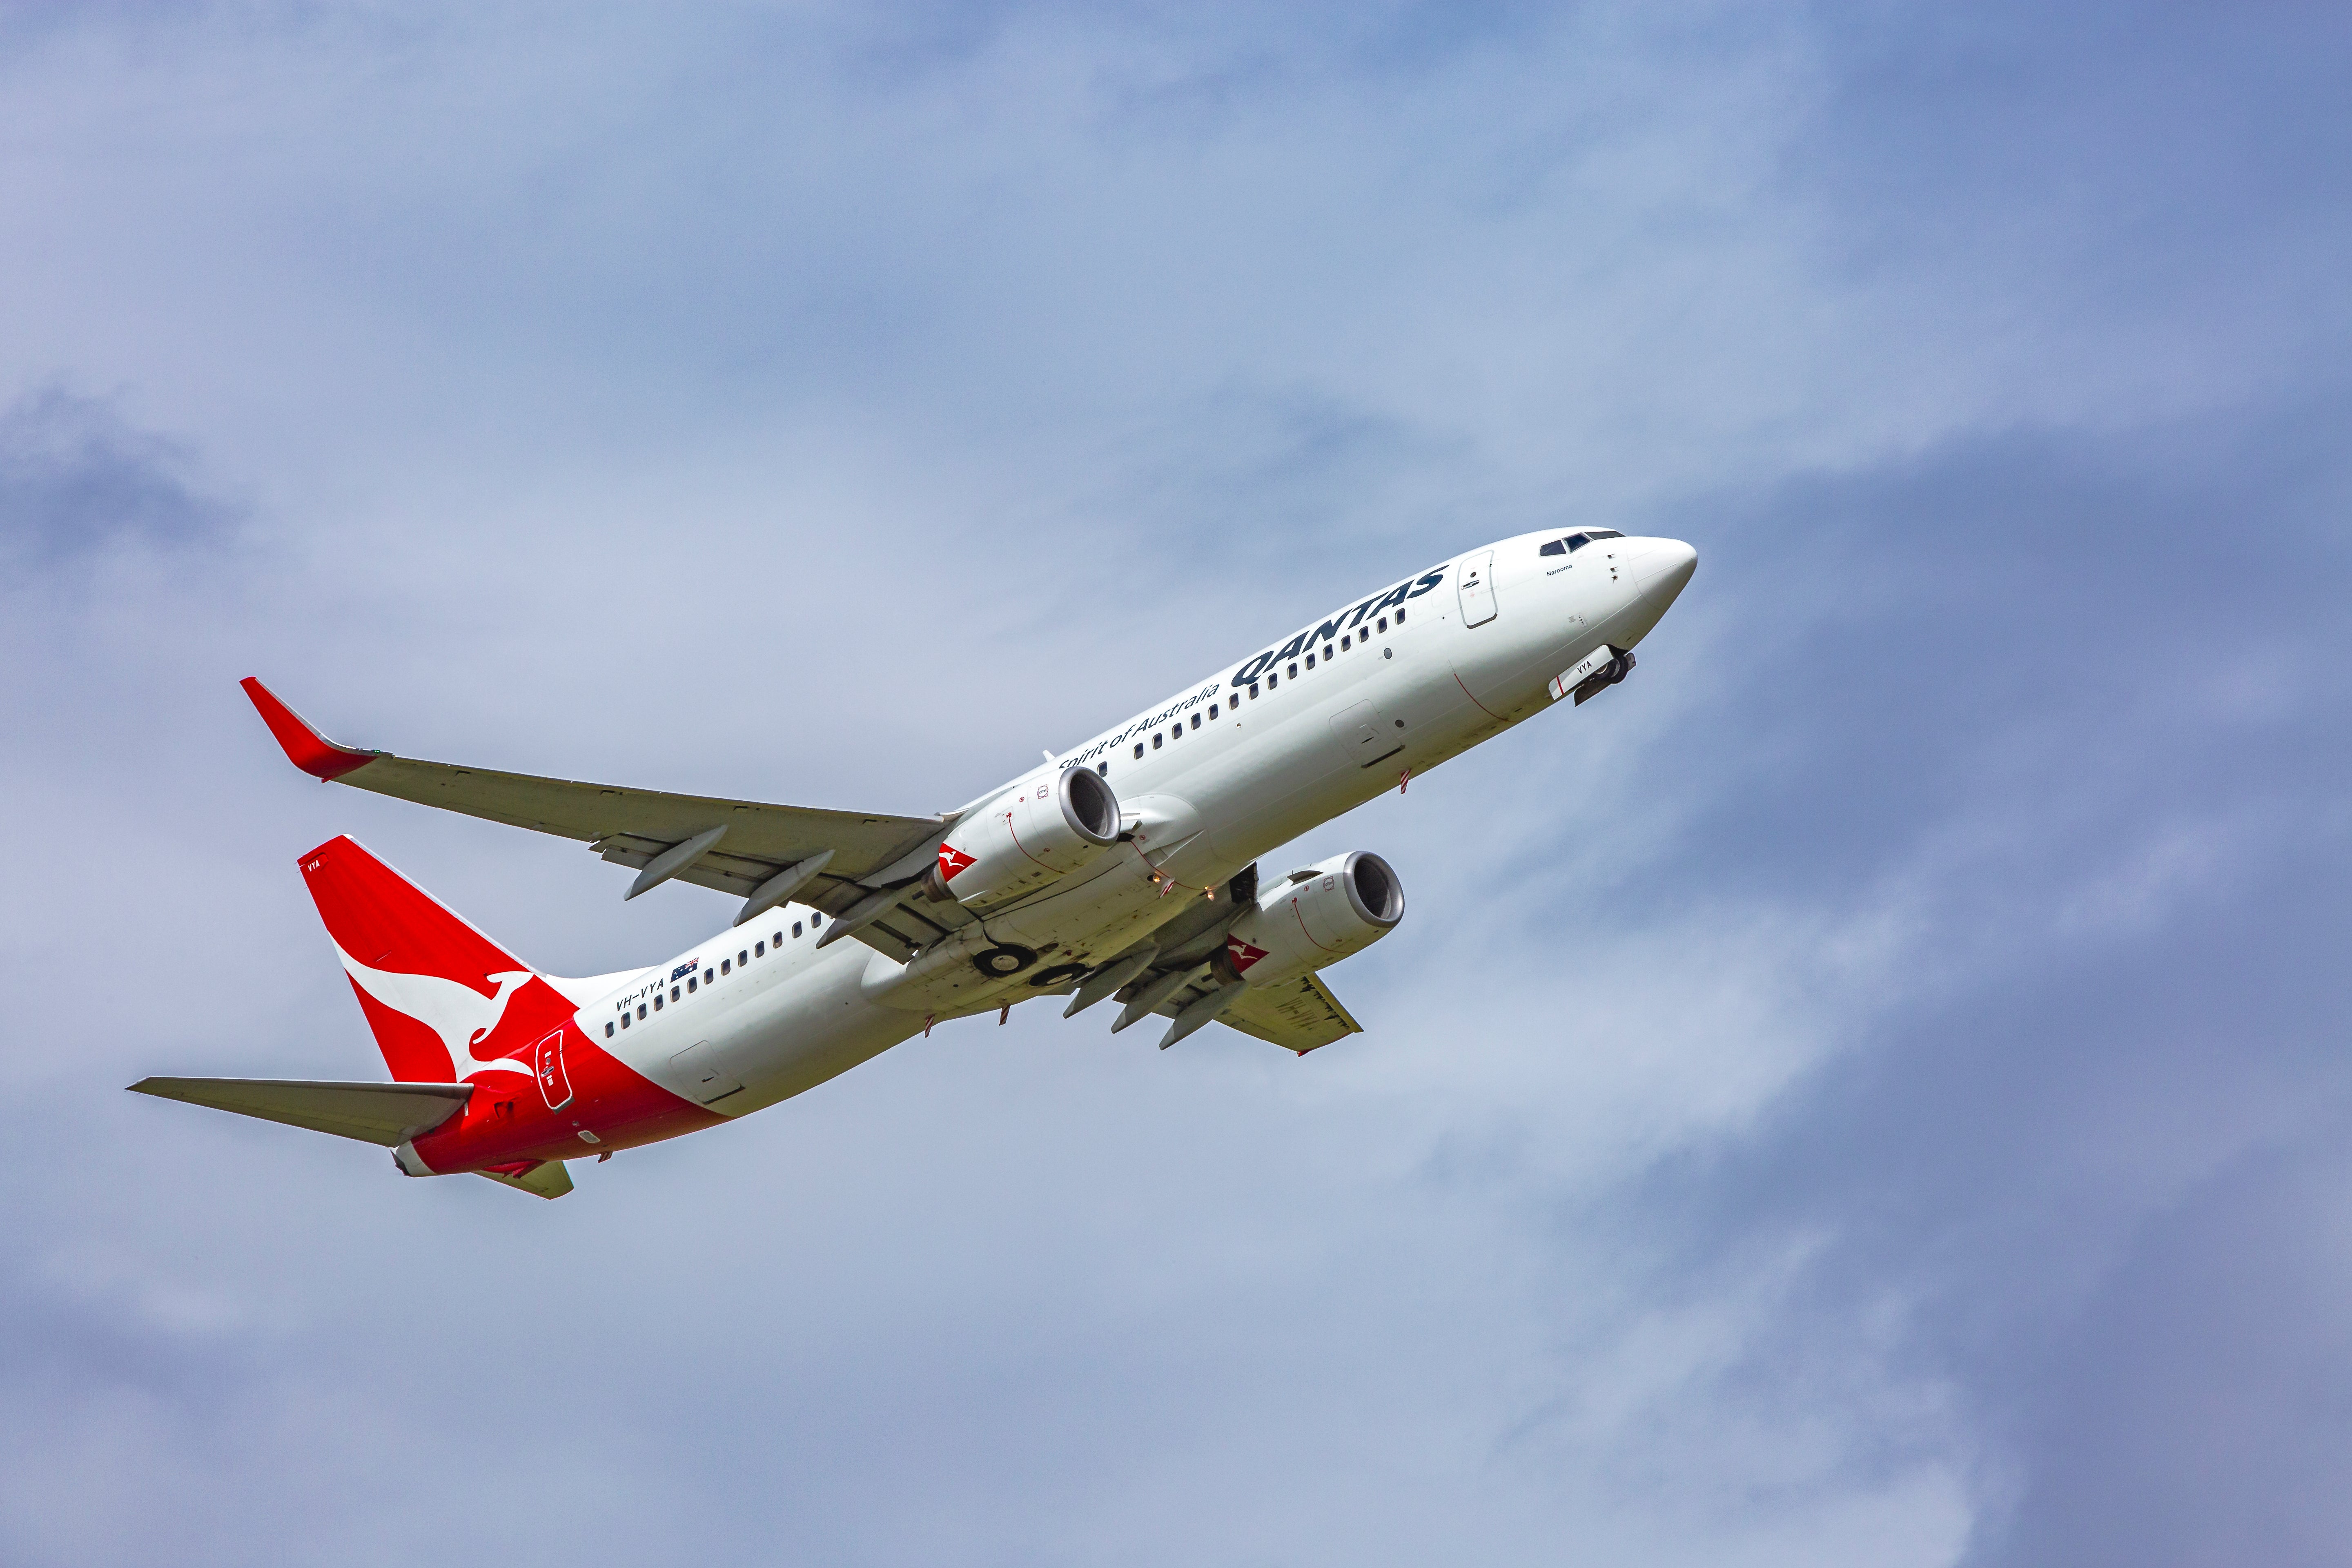 Qantas has suffered multiple setbacks with flights having to turn around during January